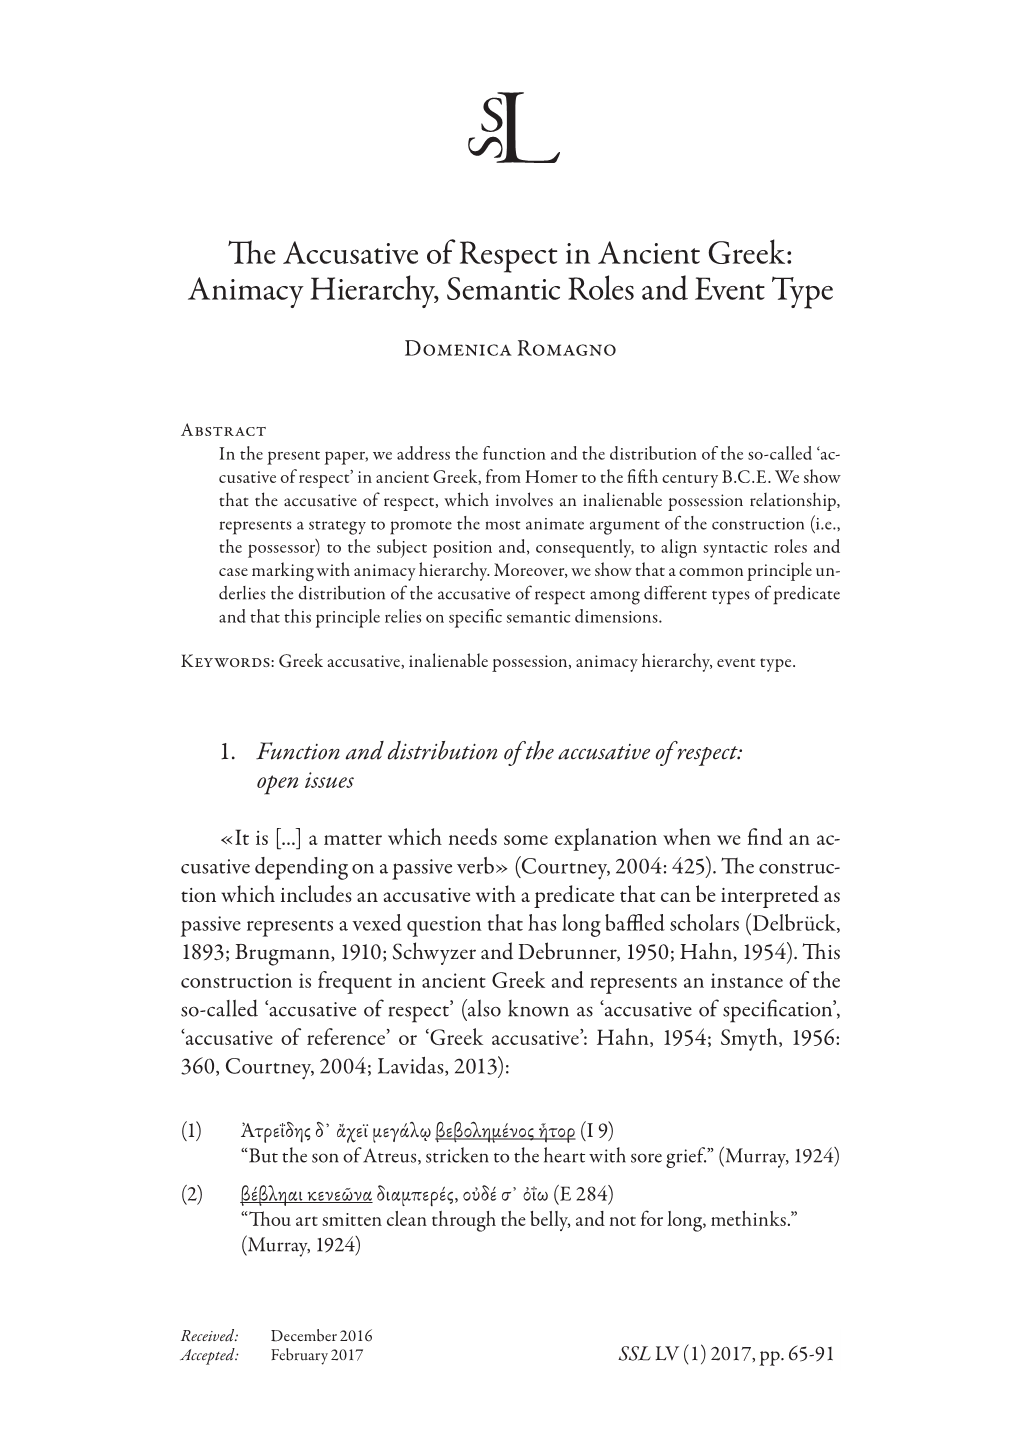 The Accusative of Respect in Ancient Greek: Animacy Hierarchy, Semantic Roles and Event Type